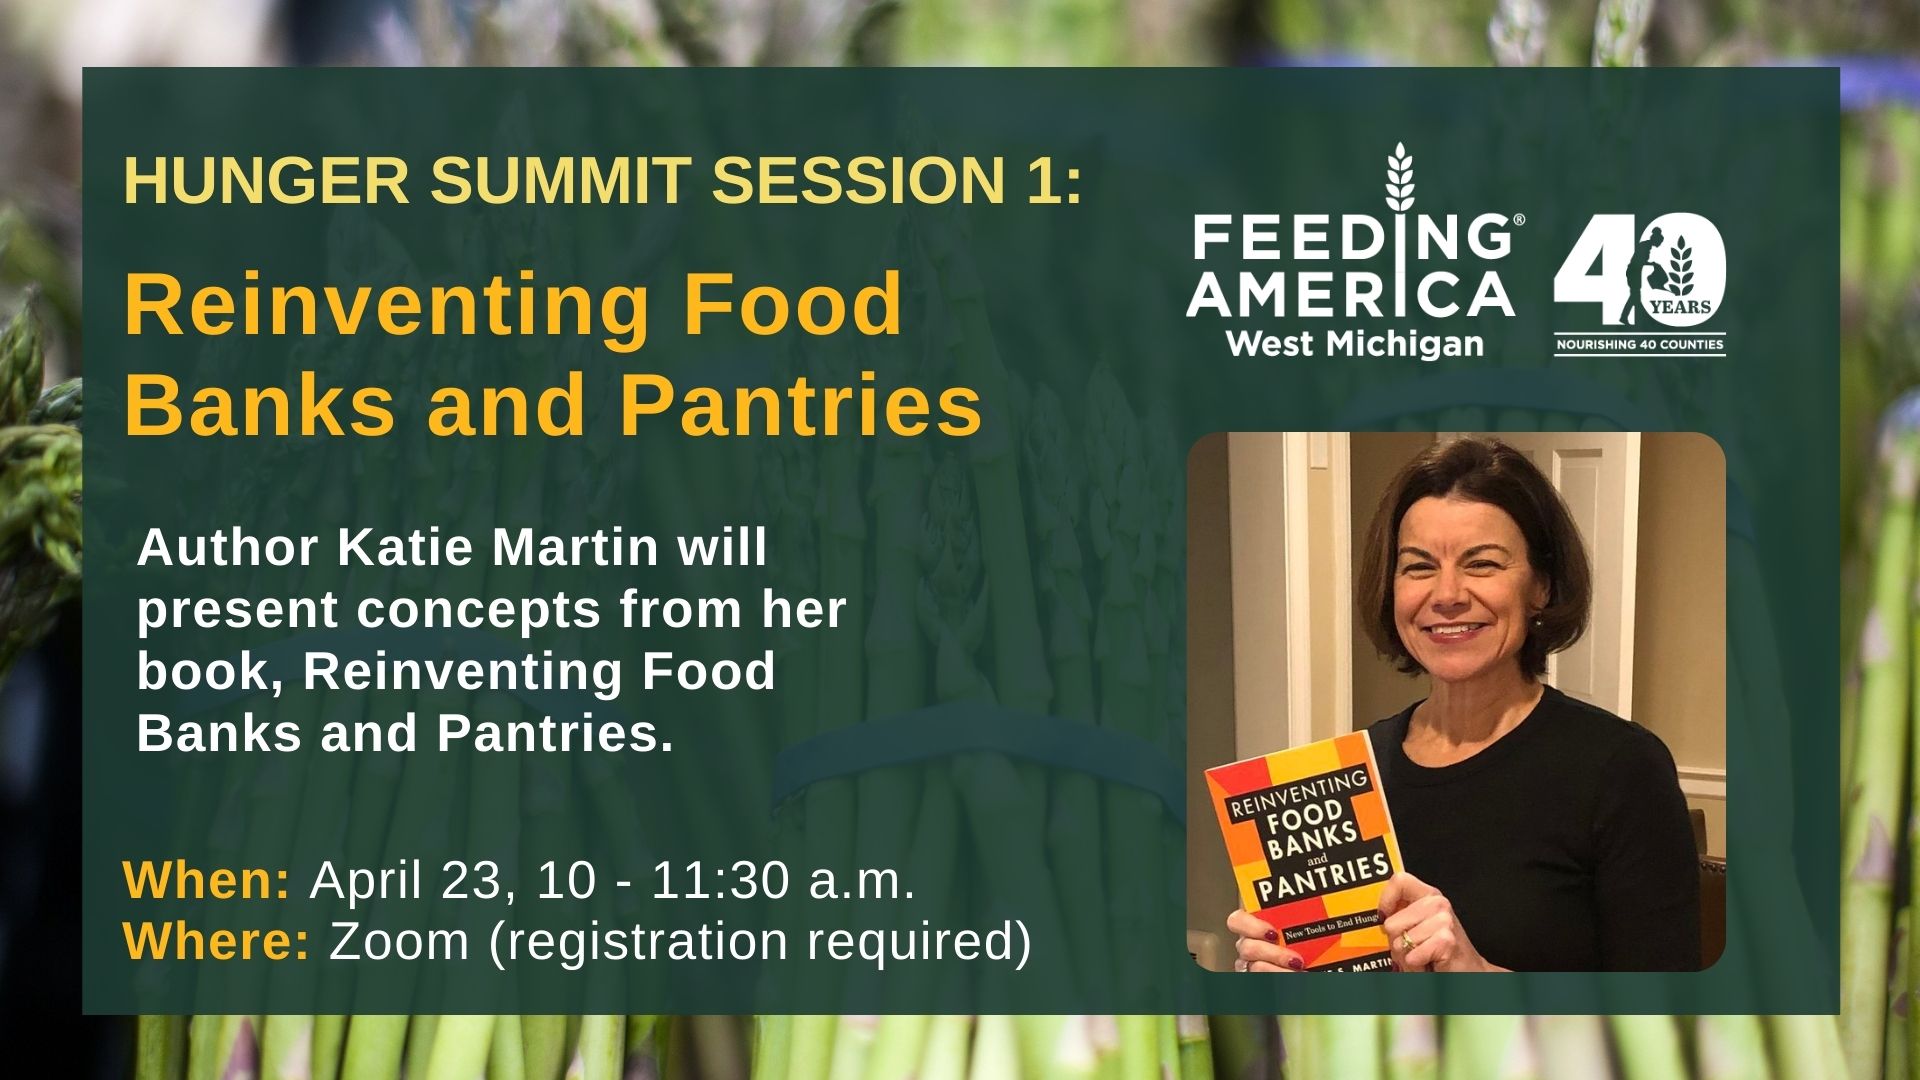 Hunger Summit Session 1 - Reinventing Food Banks and Pantries - Author Katie Martin will present concepts from her book, Reinventing Food Banks and Pantries - Watch On Youtube